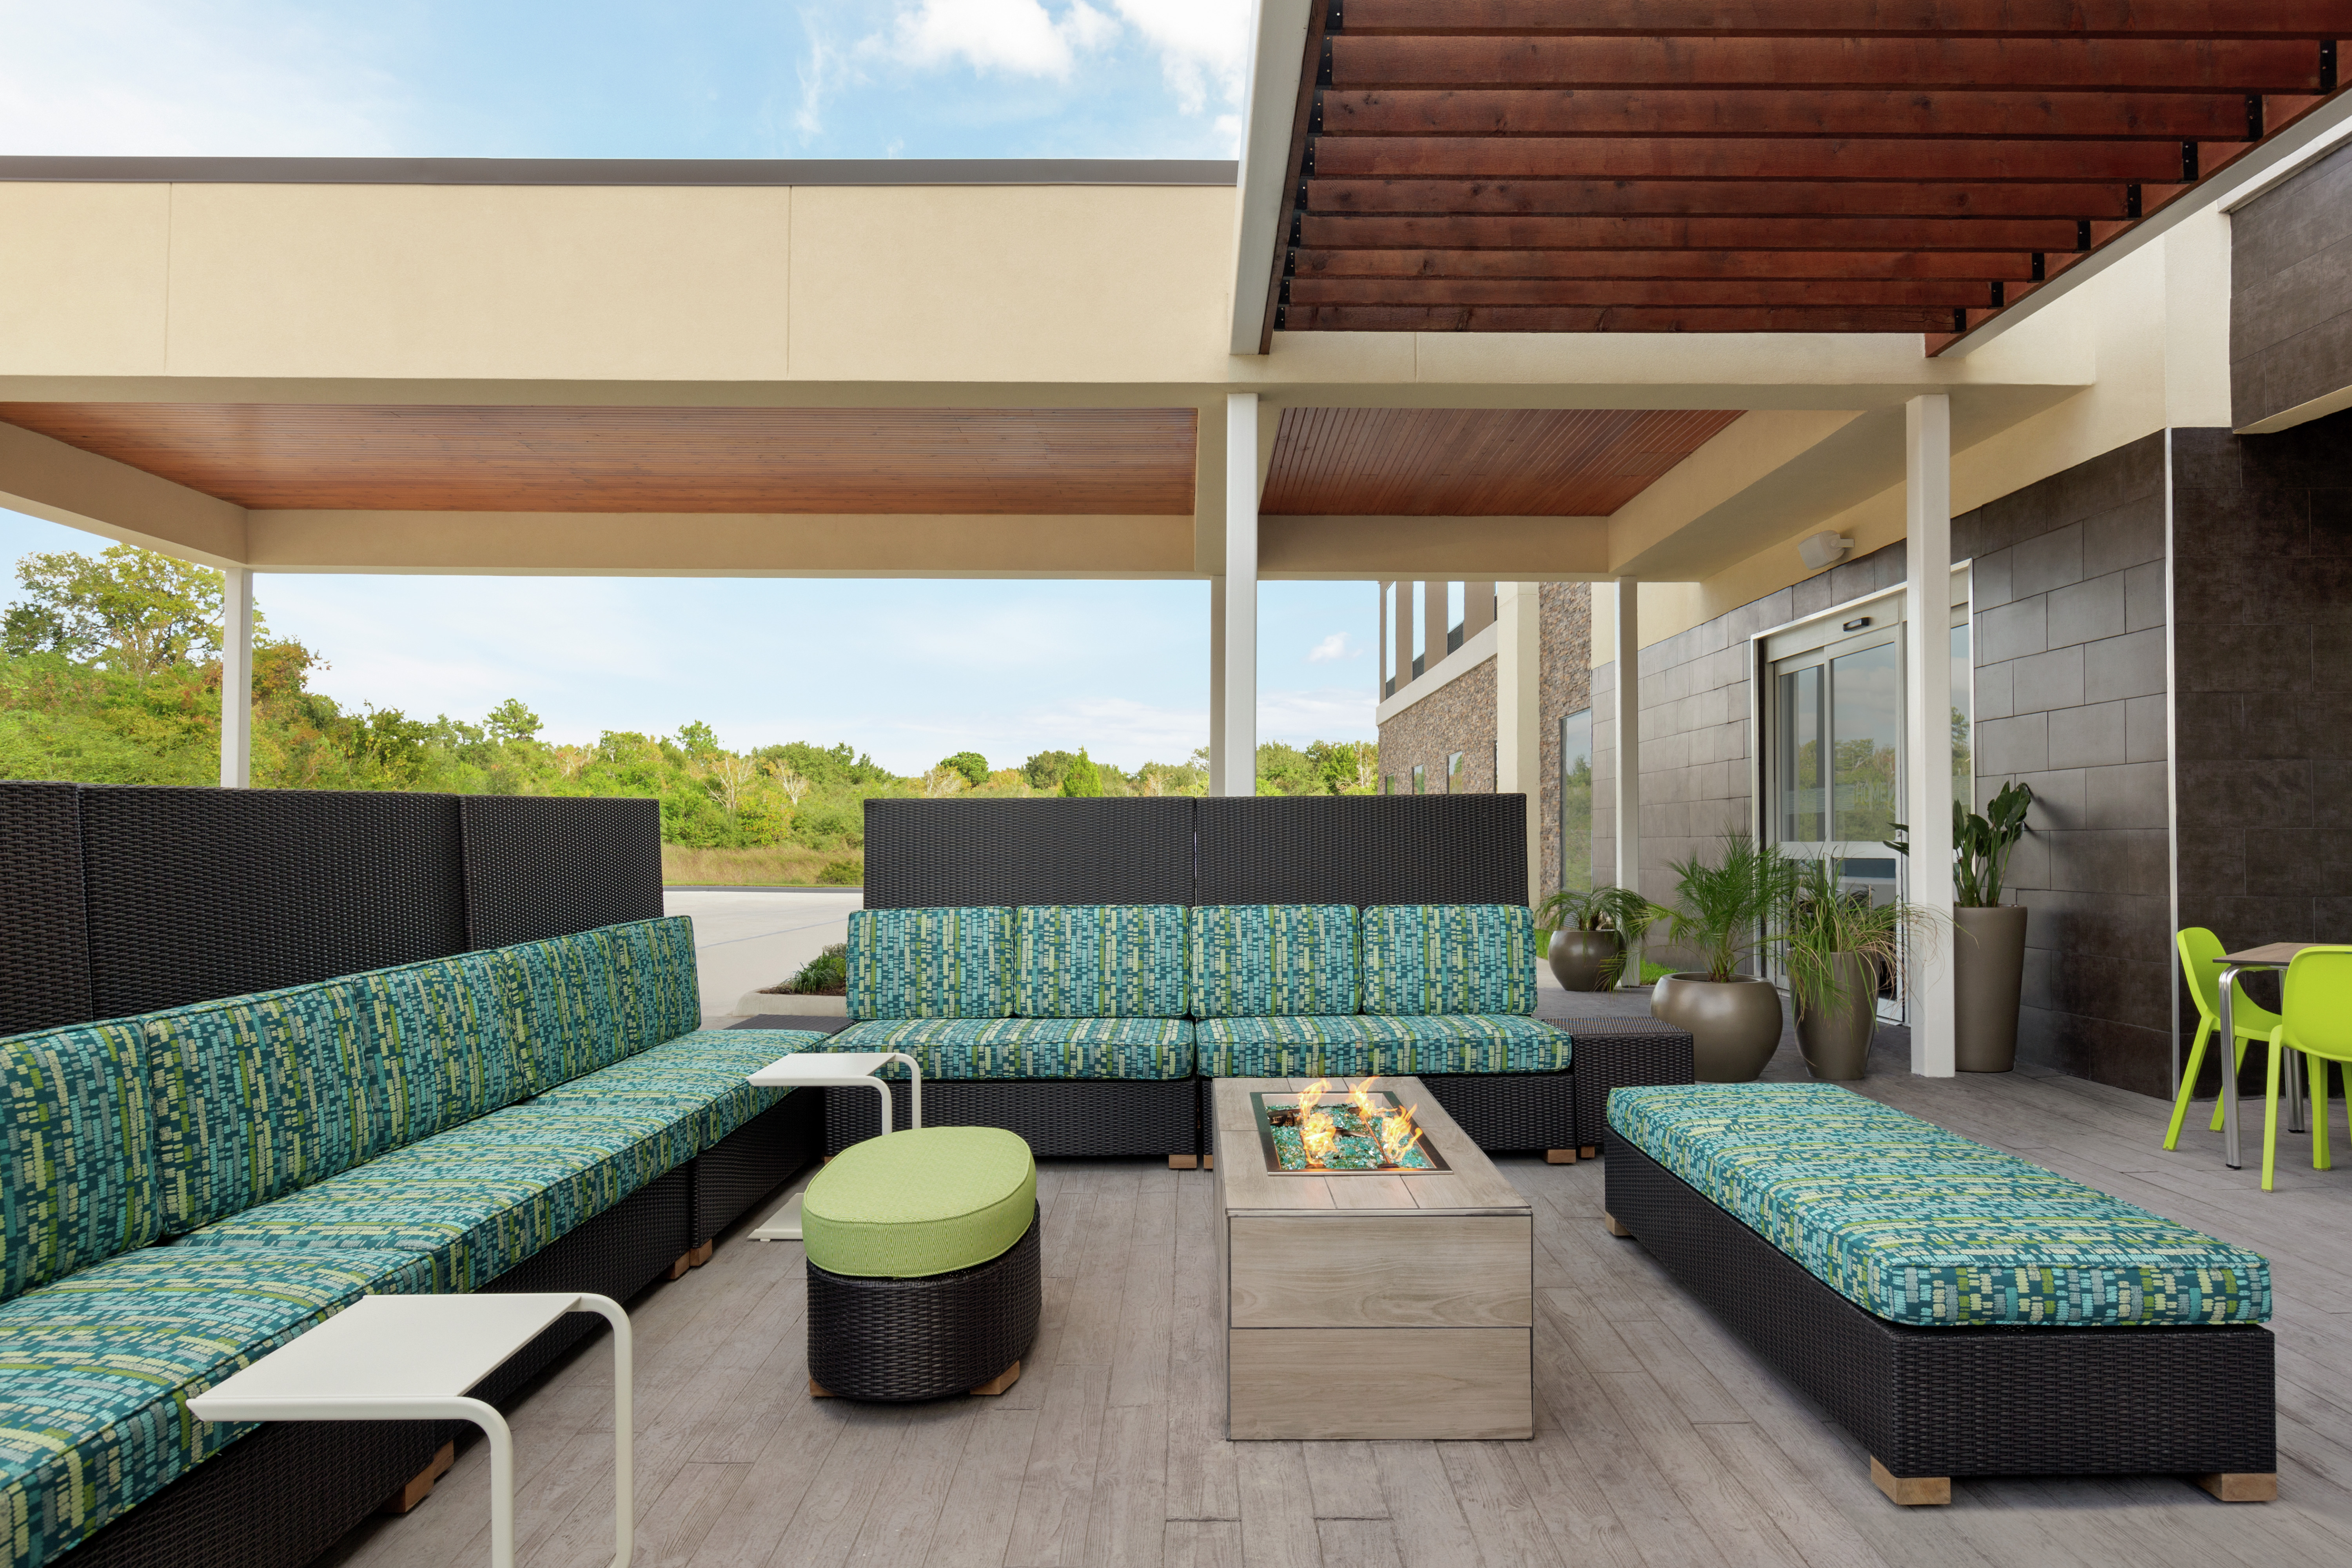 Outdoor lounge area for guests to relax with comfortable sofa style seating and firepit.